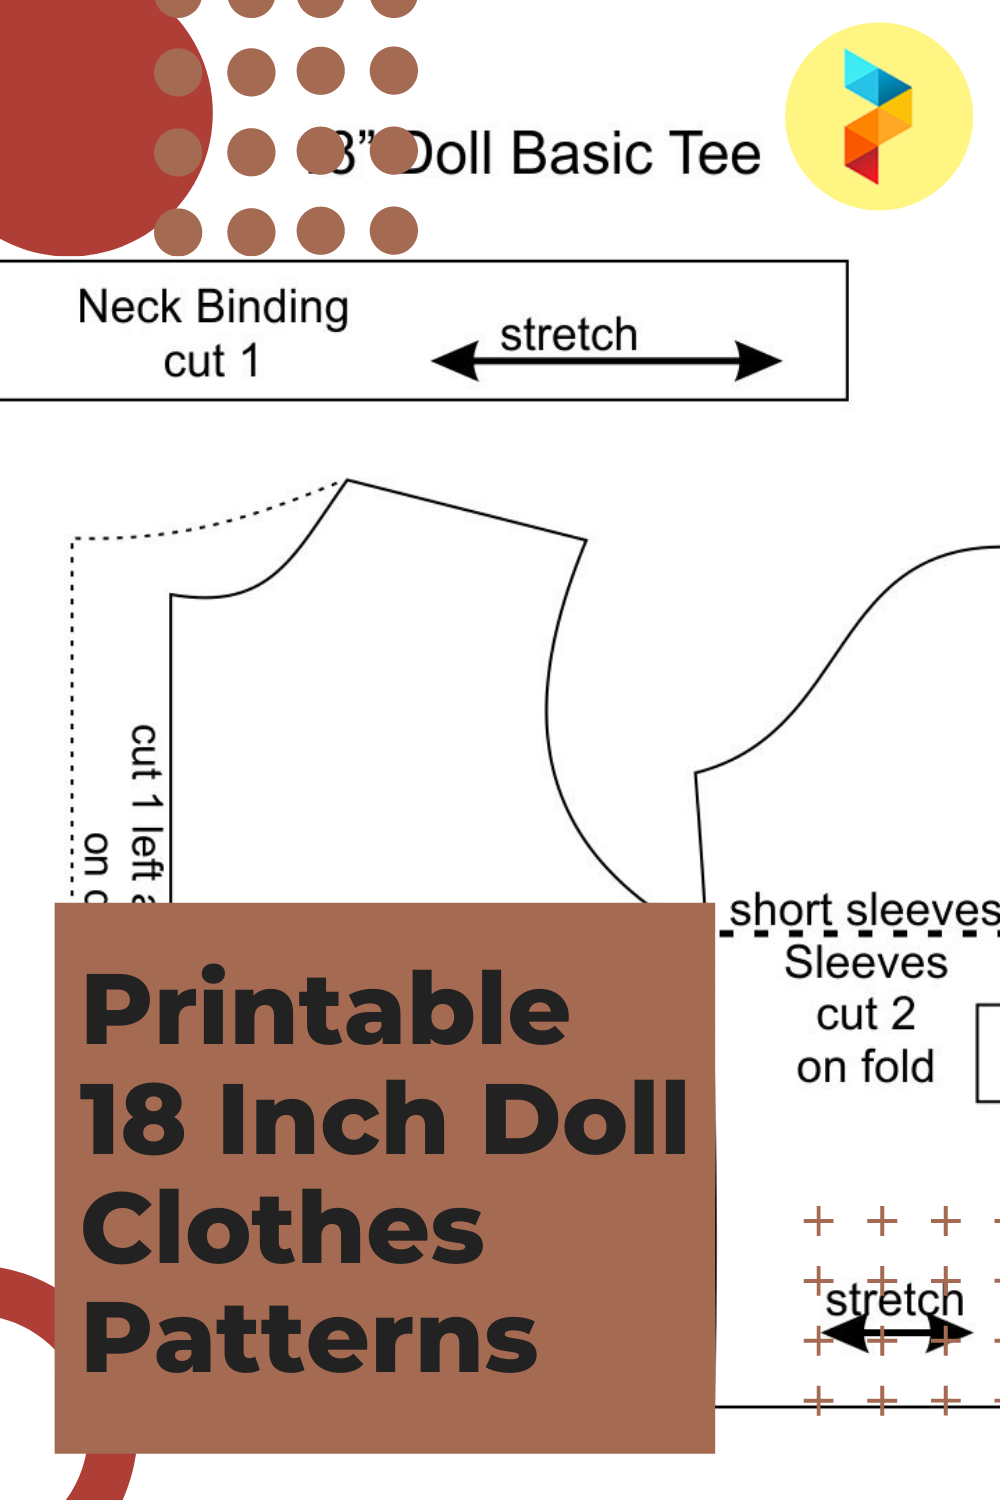 Printable 18 Inch Doll Clothes Patterns